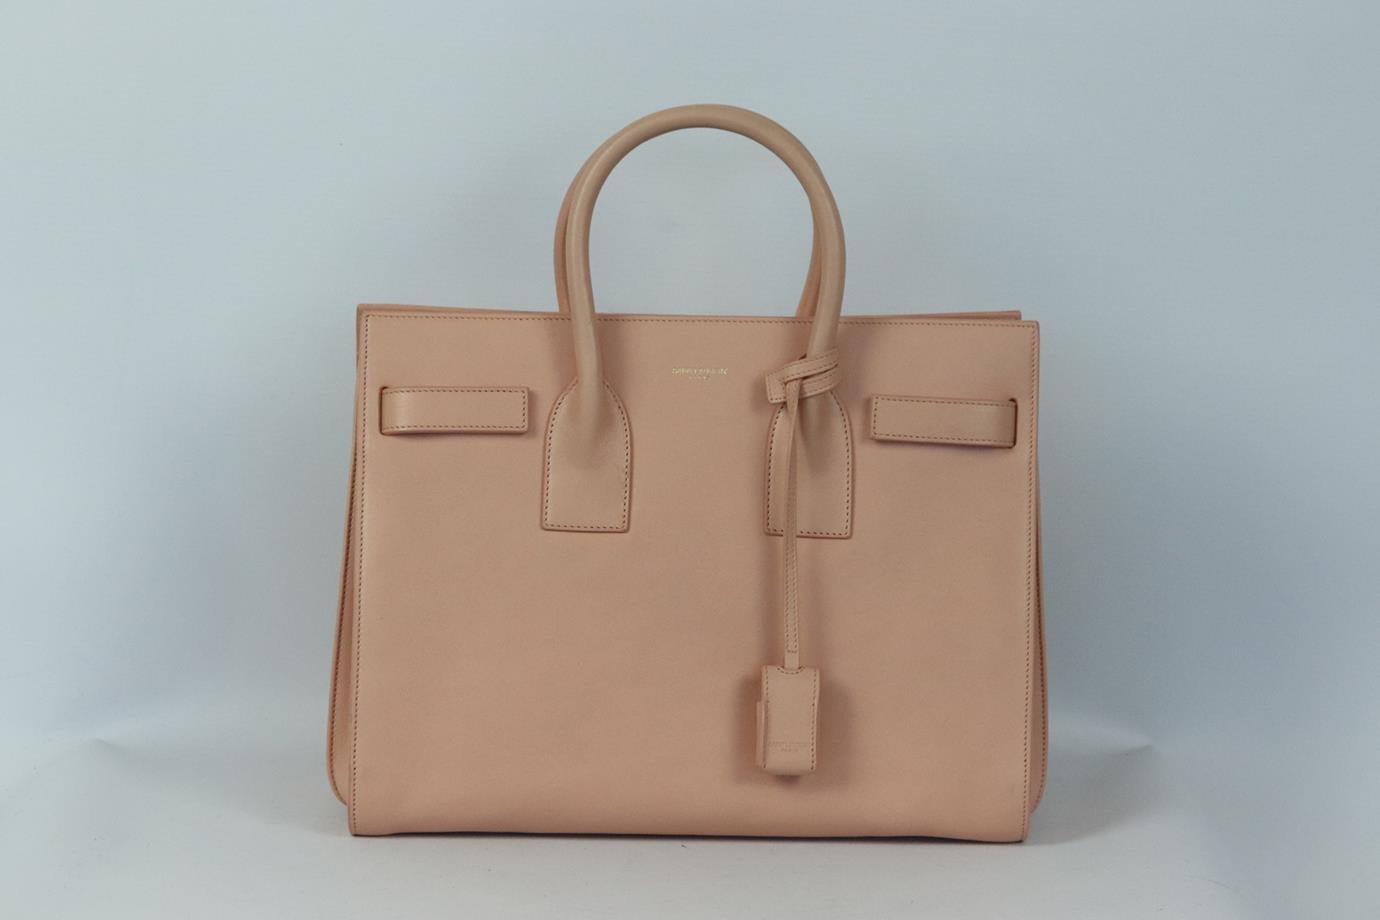 Saint Laurent Sac du Jour medium leather tote bag. Pink. Open top. Does not come with dustbag or box. Height: 9.6 in. Width: 12.5 in. Depth: 6.5 in. Handle Drop: 3.5 in. Strap Drop: 19.2 in. Very good condition - Few scuff marks to base. One light